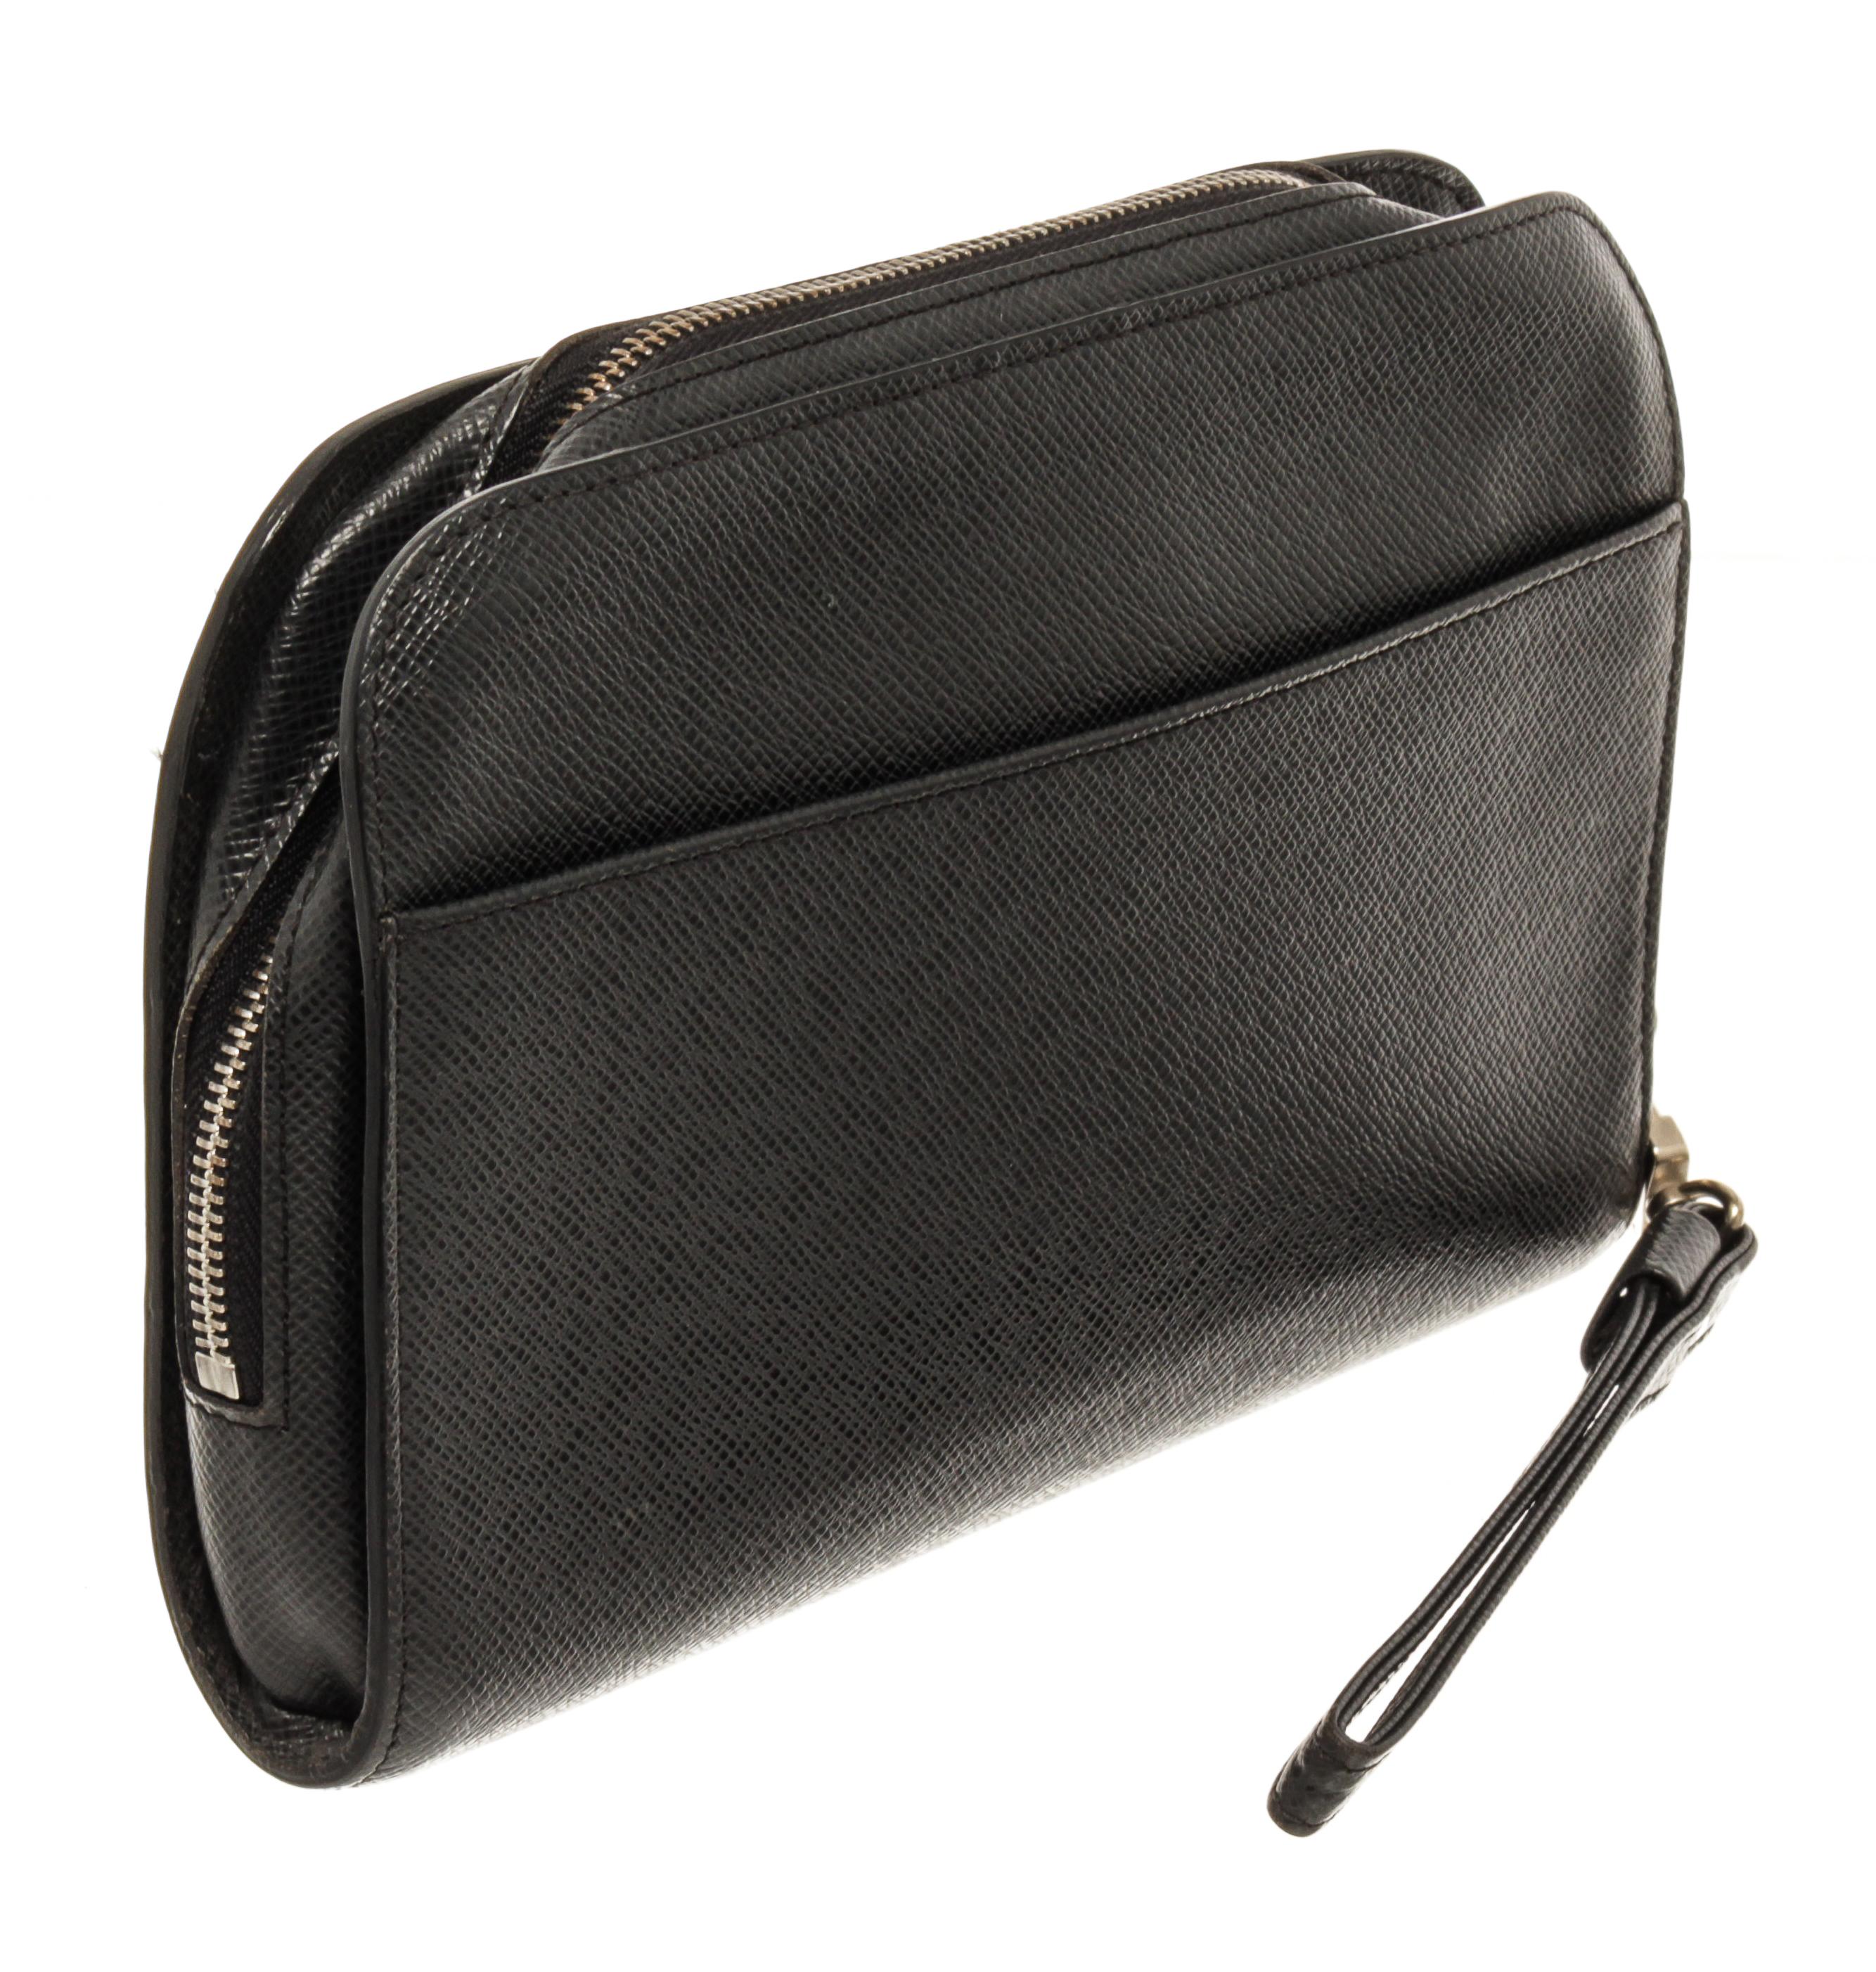 Louis Vuitton Black Taiga Leather Orsay Wrist Clutch with silver-tone hardware, black taiga leather trim, exterior slip pocket at back, black leather lining, interior slip pocket, detachable black leather wrist strap, and zipper closure at the top.